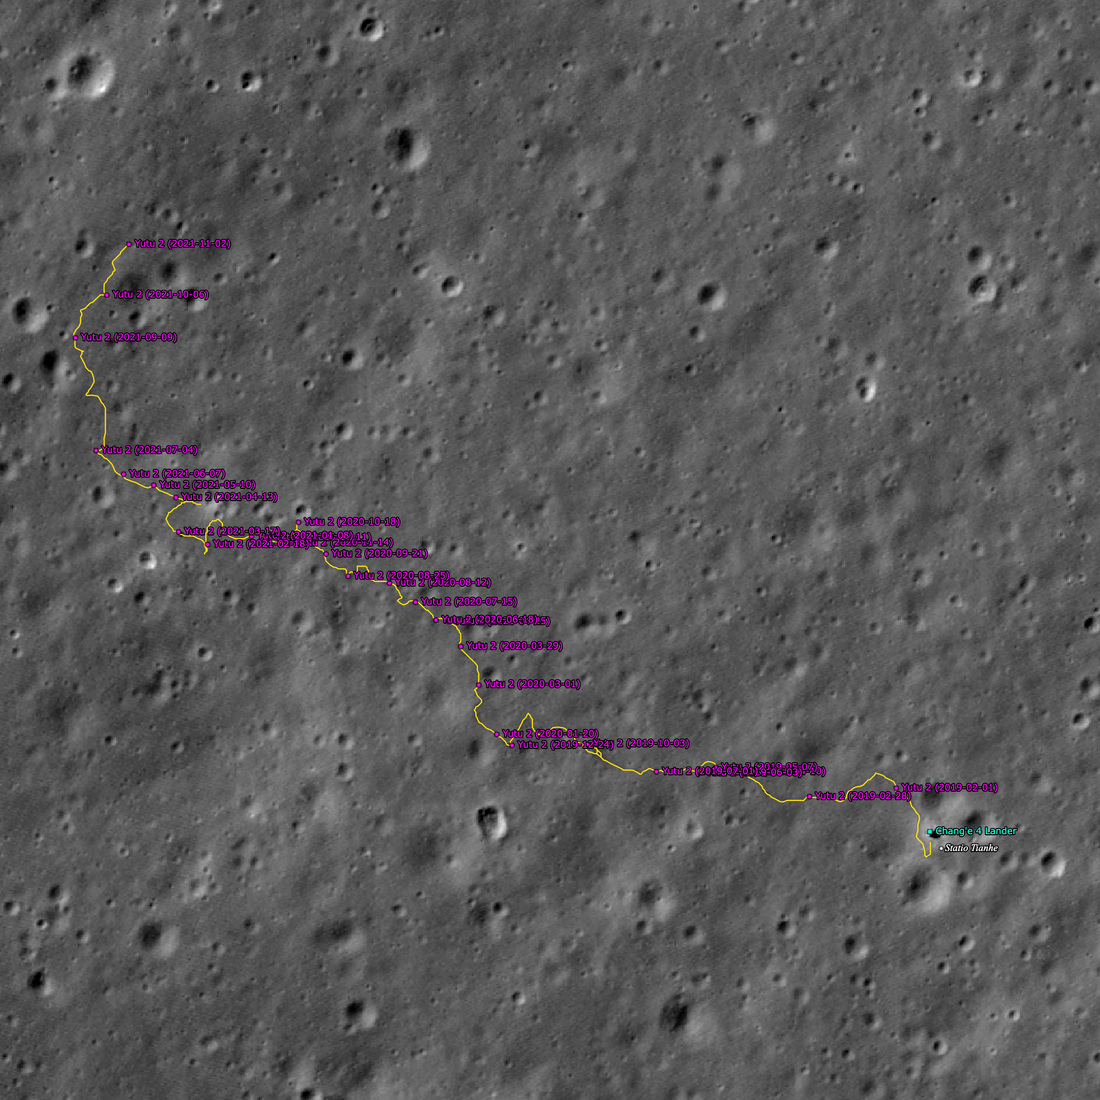 Image of the new Chang'e 4 Zoomable Traverse view from the Featured Sites section of the LROC website.